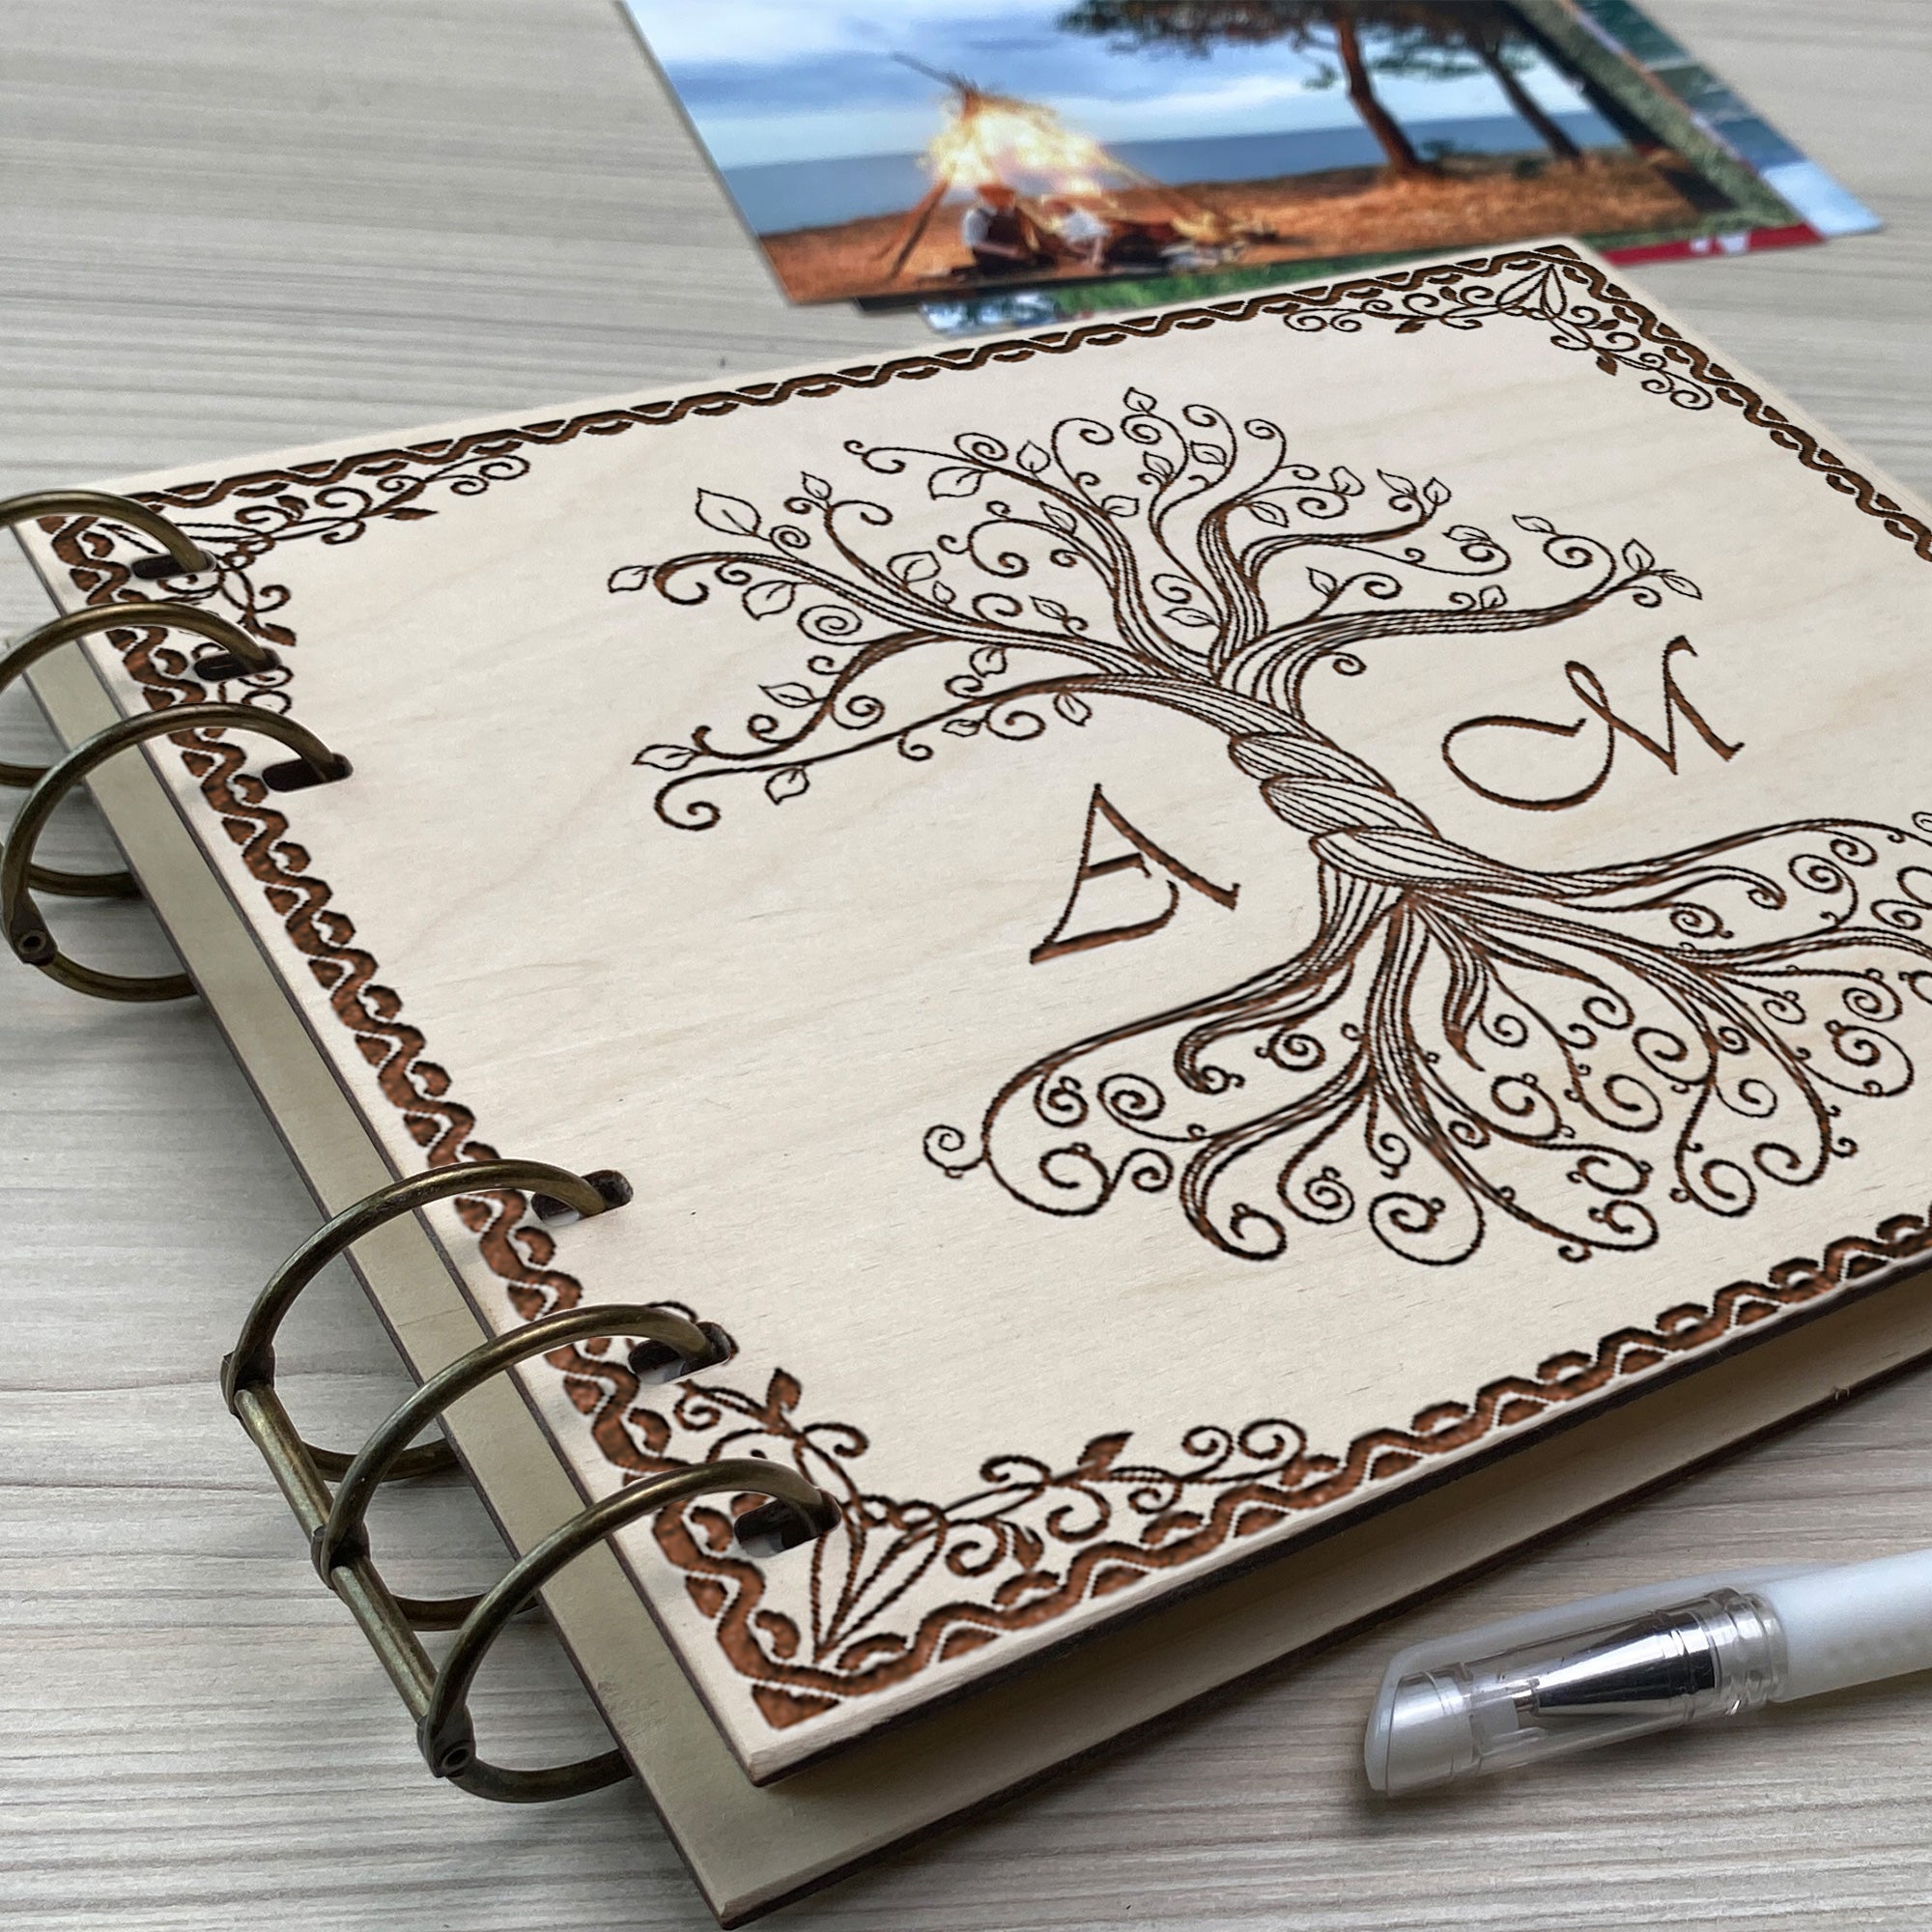 Personalized photo album cover and Family Wood engraving